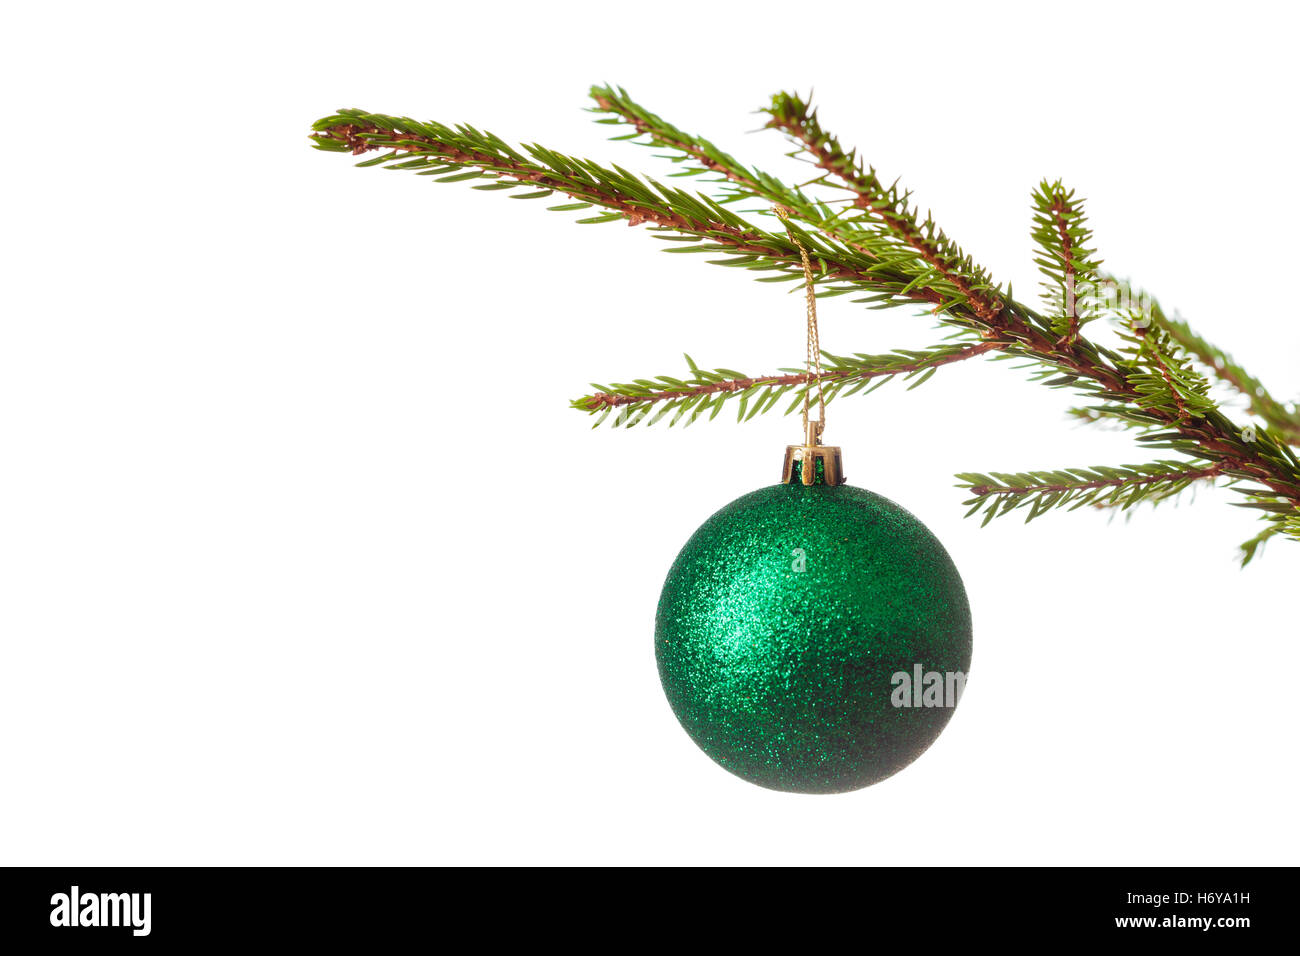 Decoration bauble on decorated Christmas tree iso Stock Photo